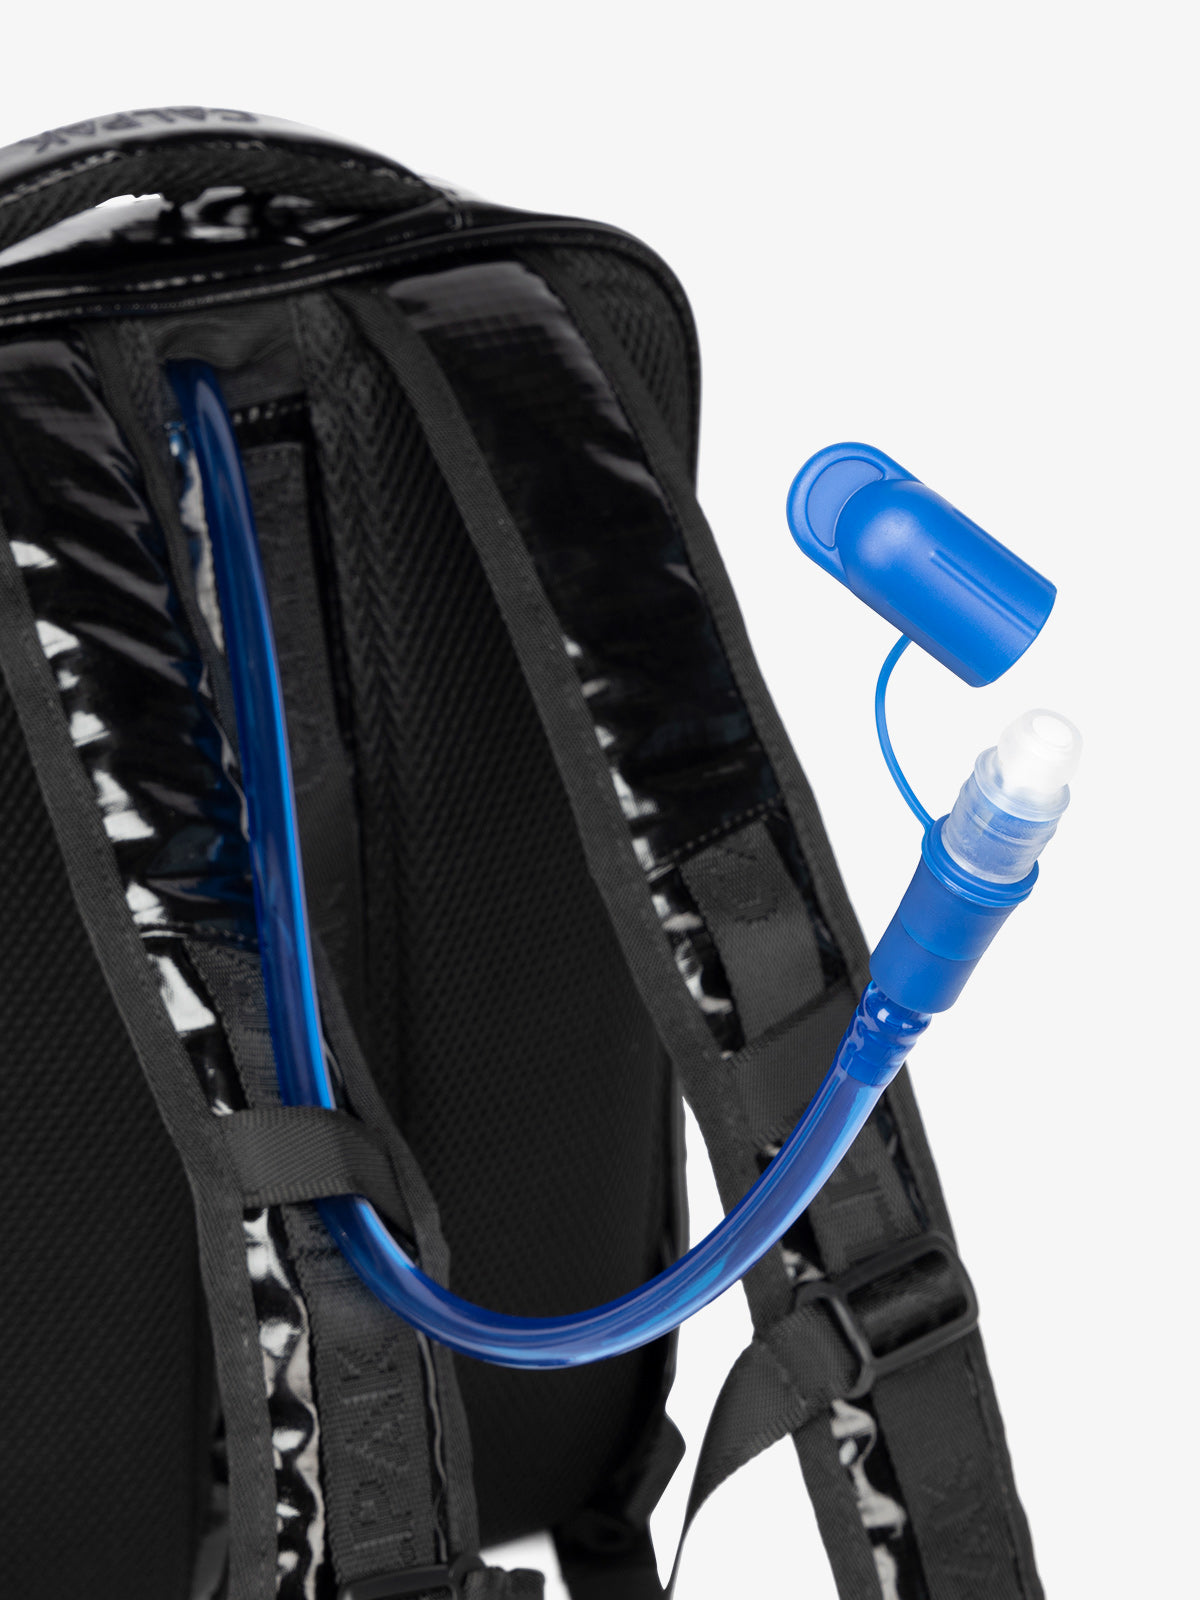 Close up of removable hydration reservoir straw with valve cap in black